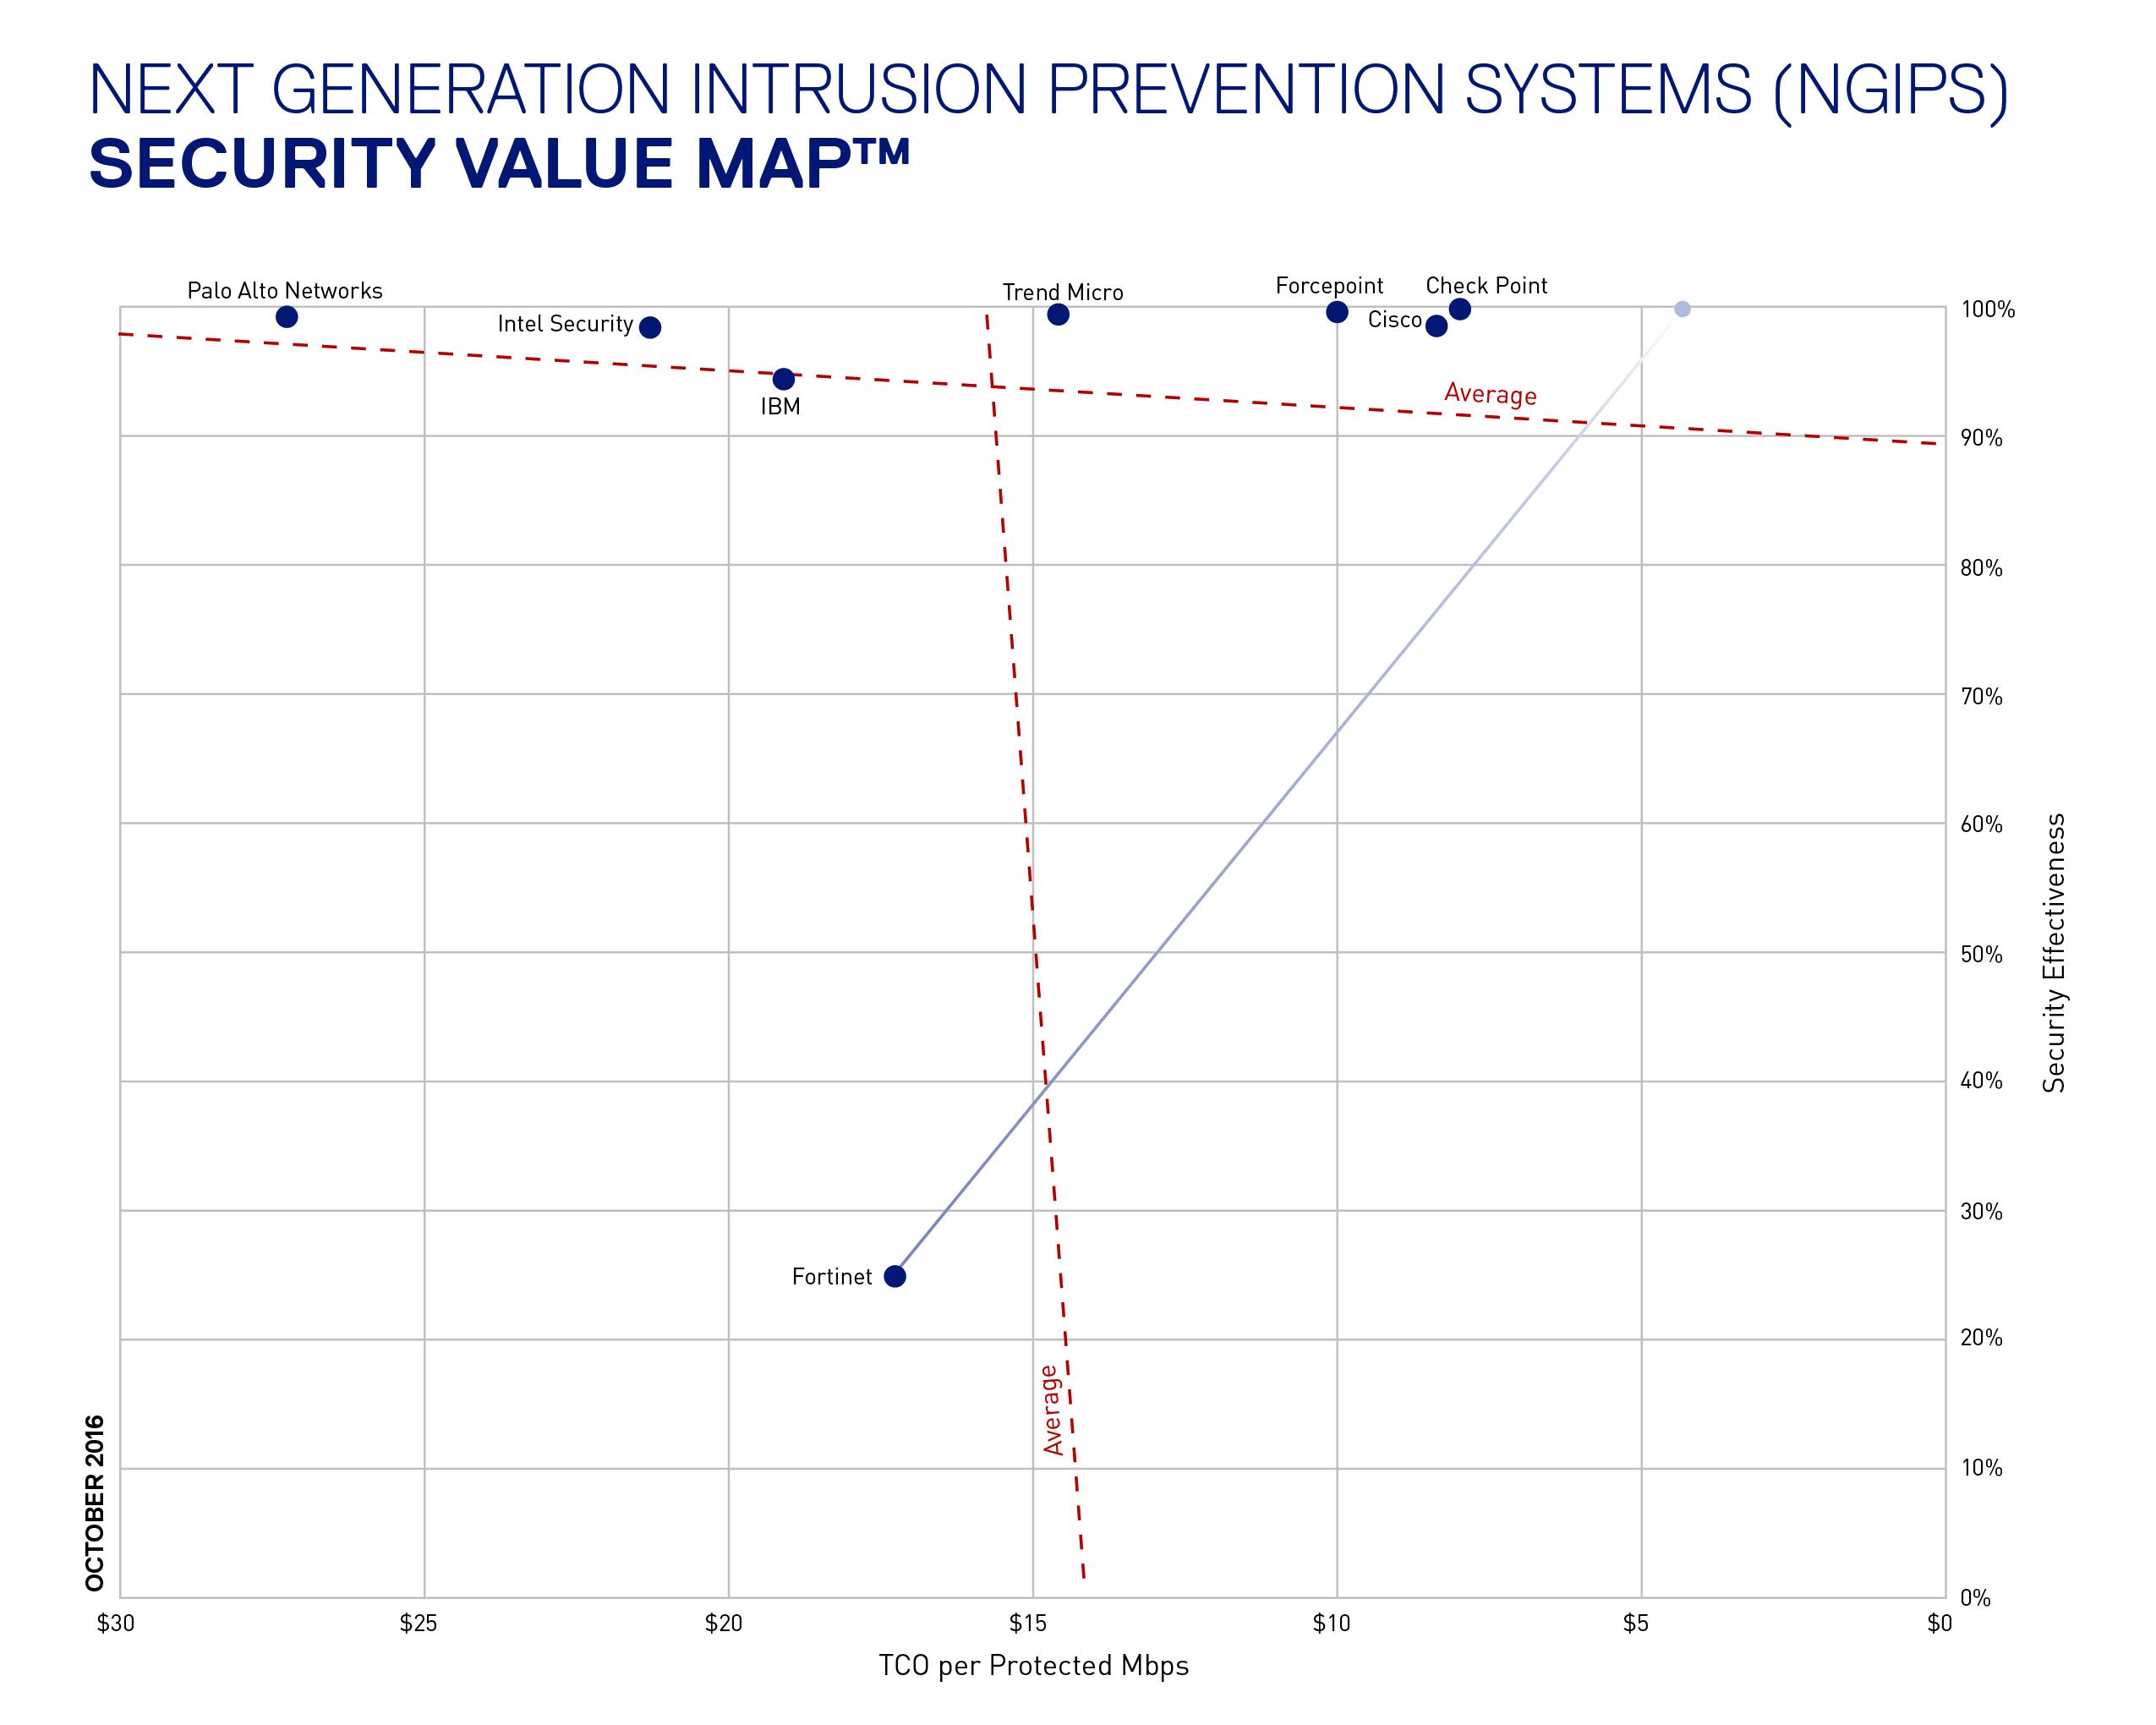 Next Generation Intrusion Prevention Systems (NGIPS) Security Value Map